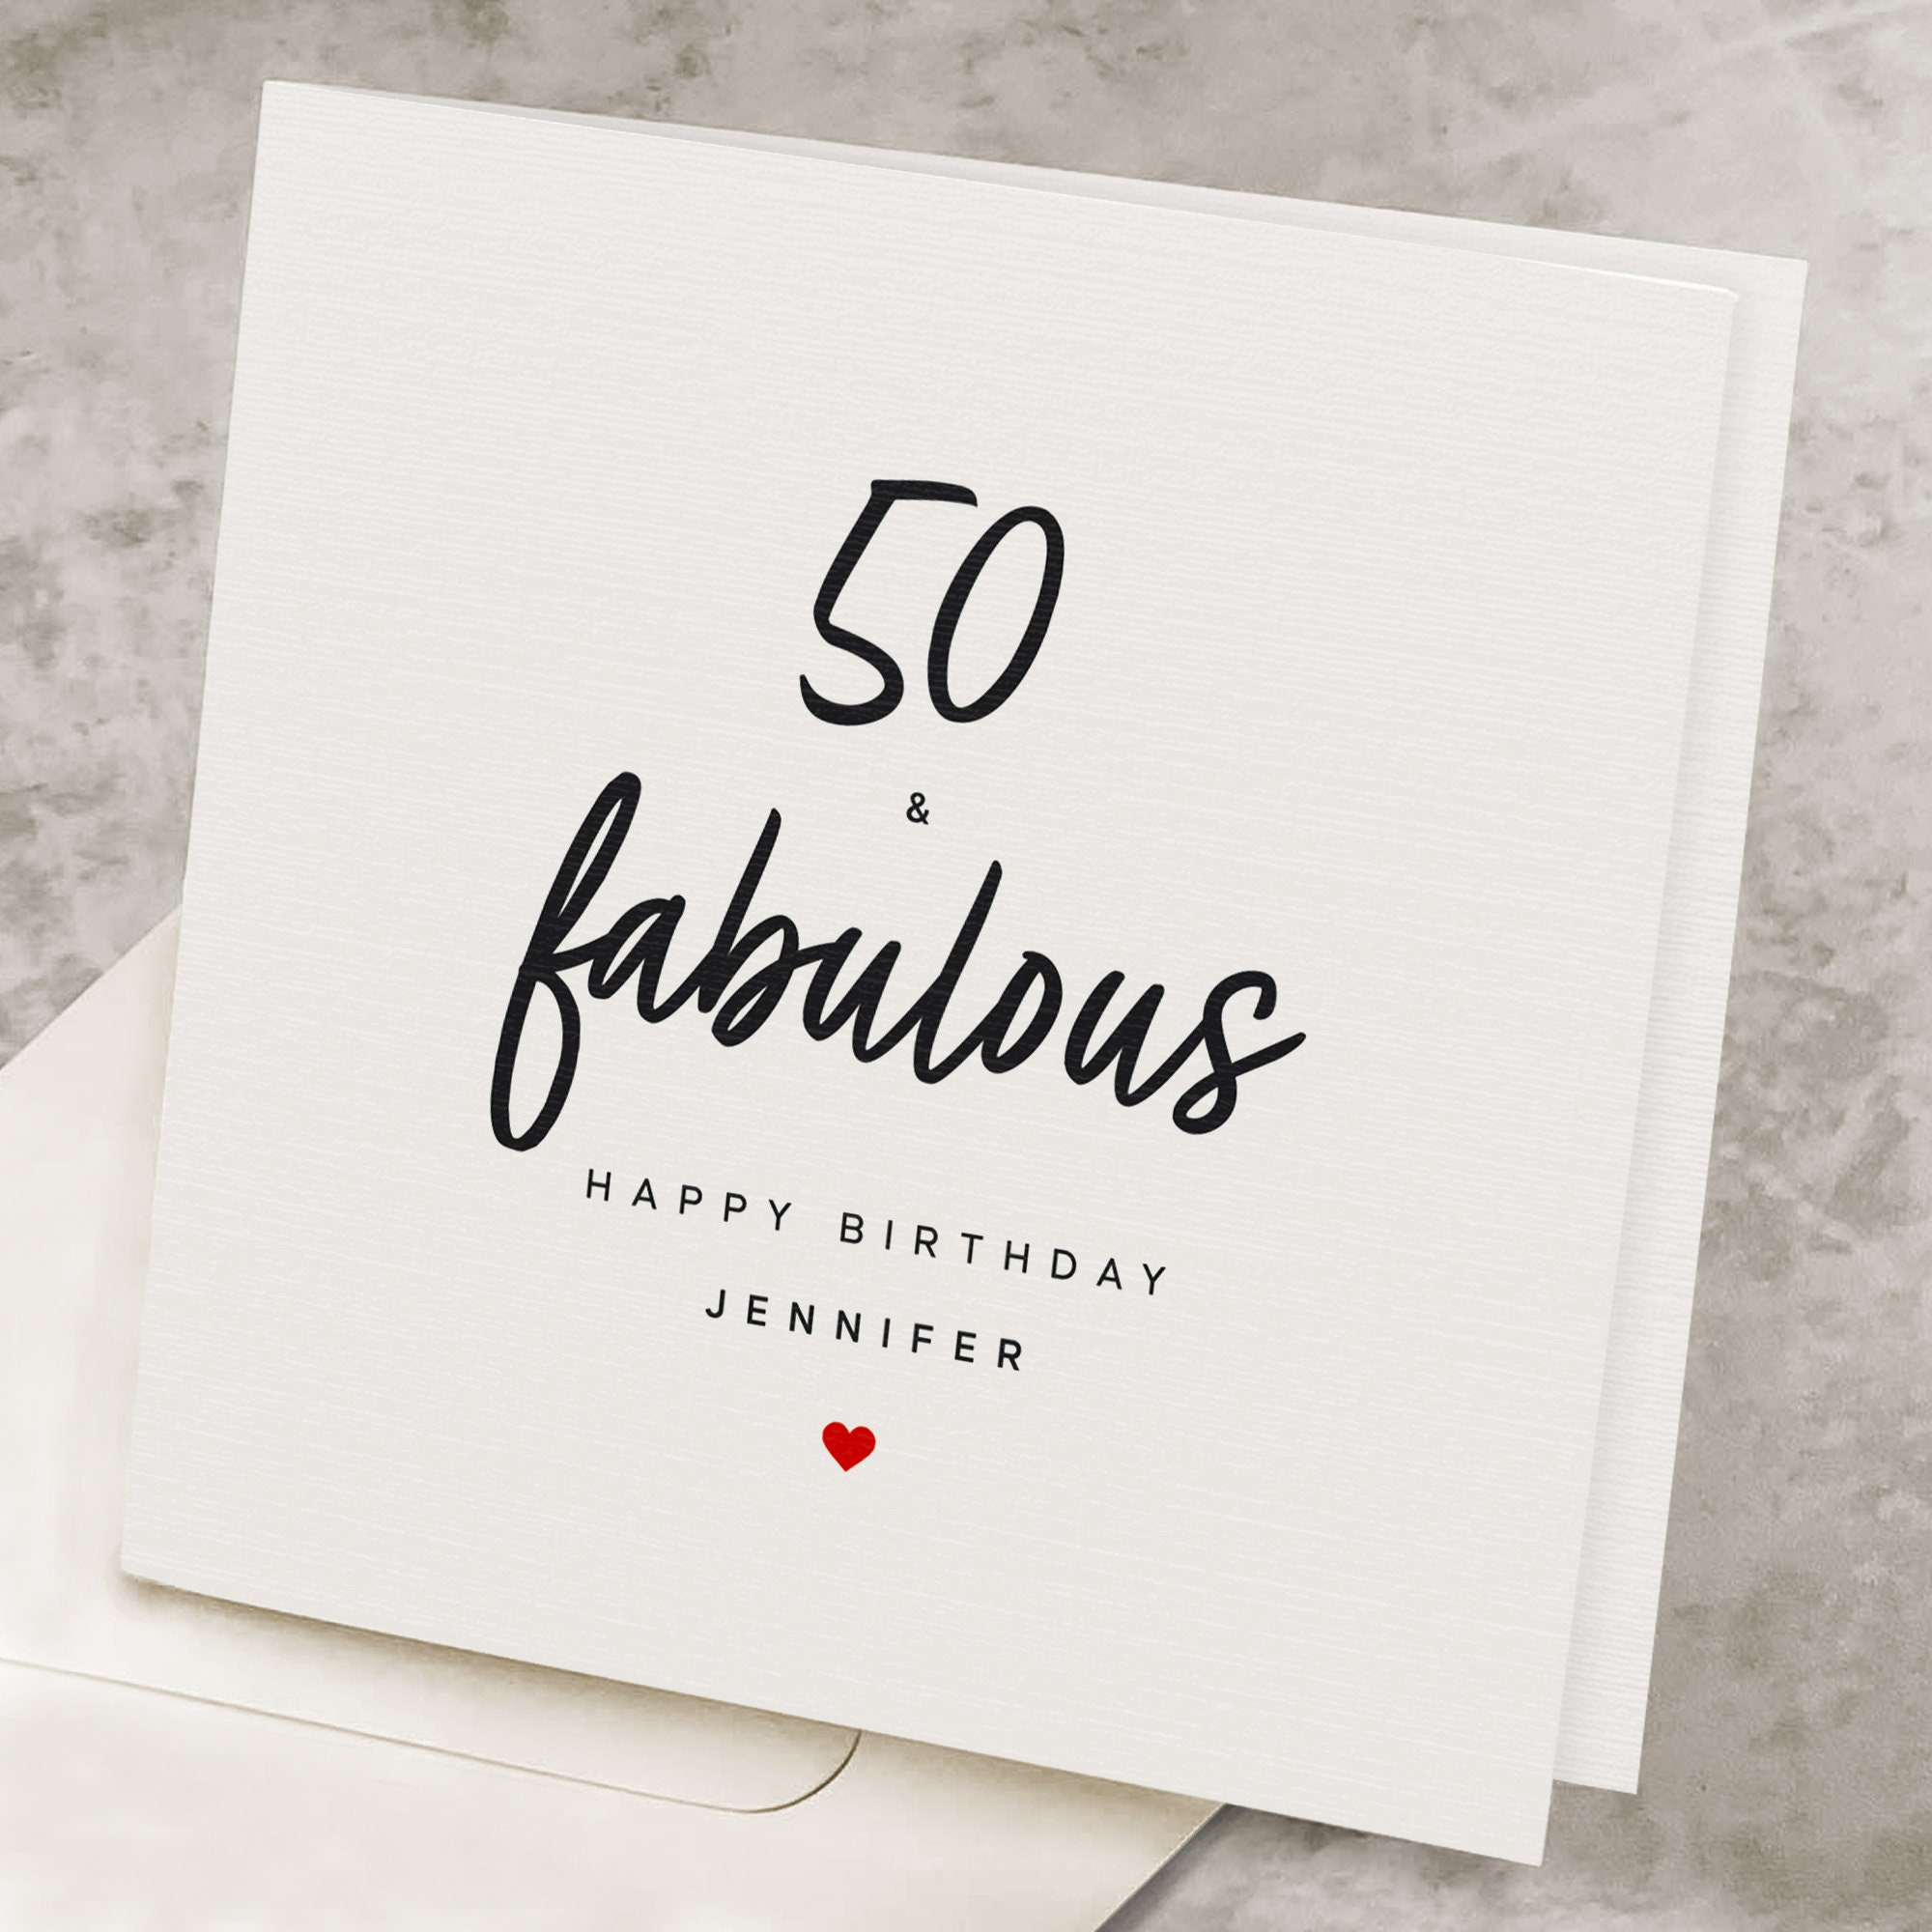 50 Cute Gifts for Your Girlfriend's Birthday » All Gifts Considered